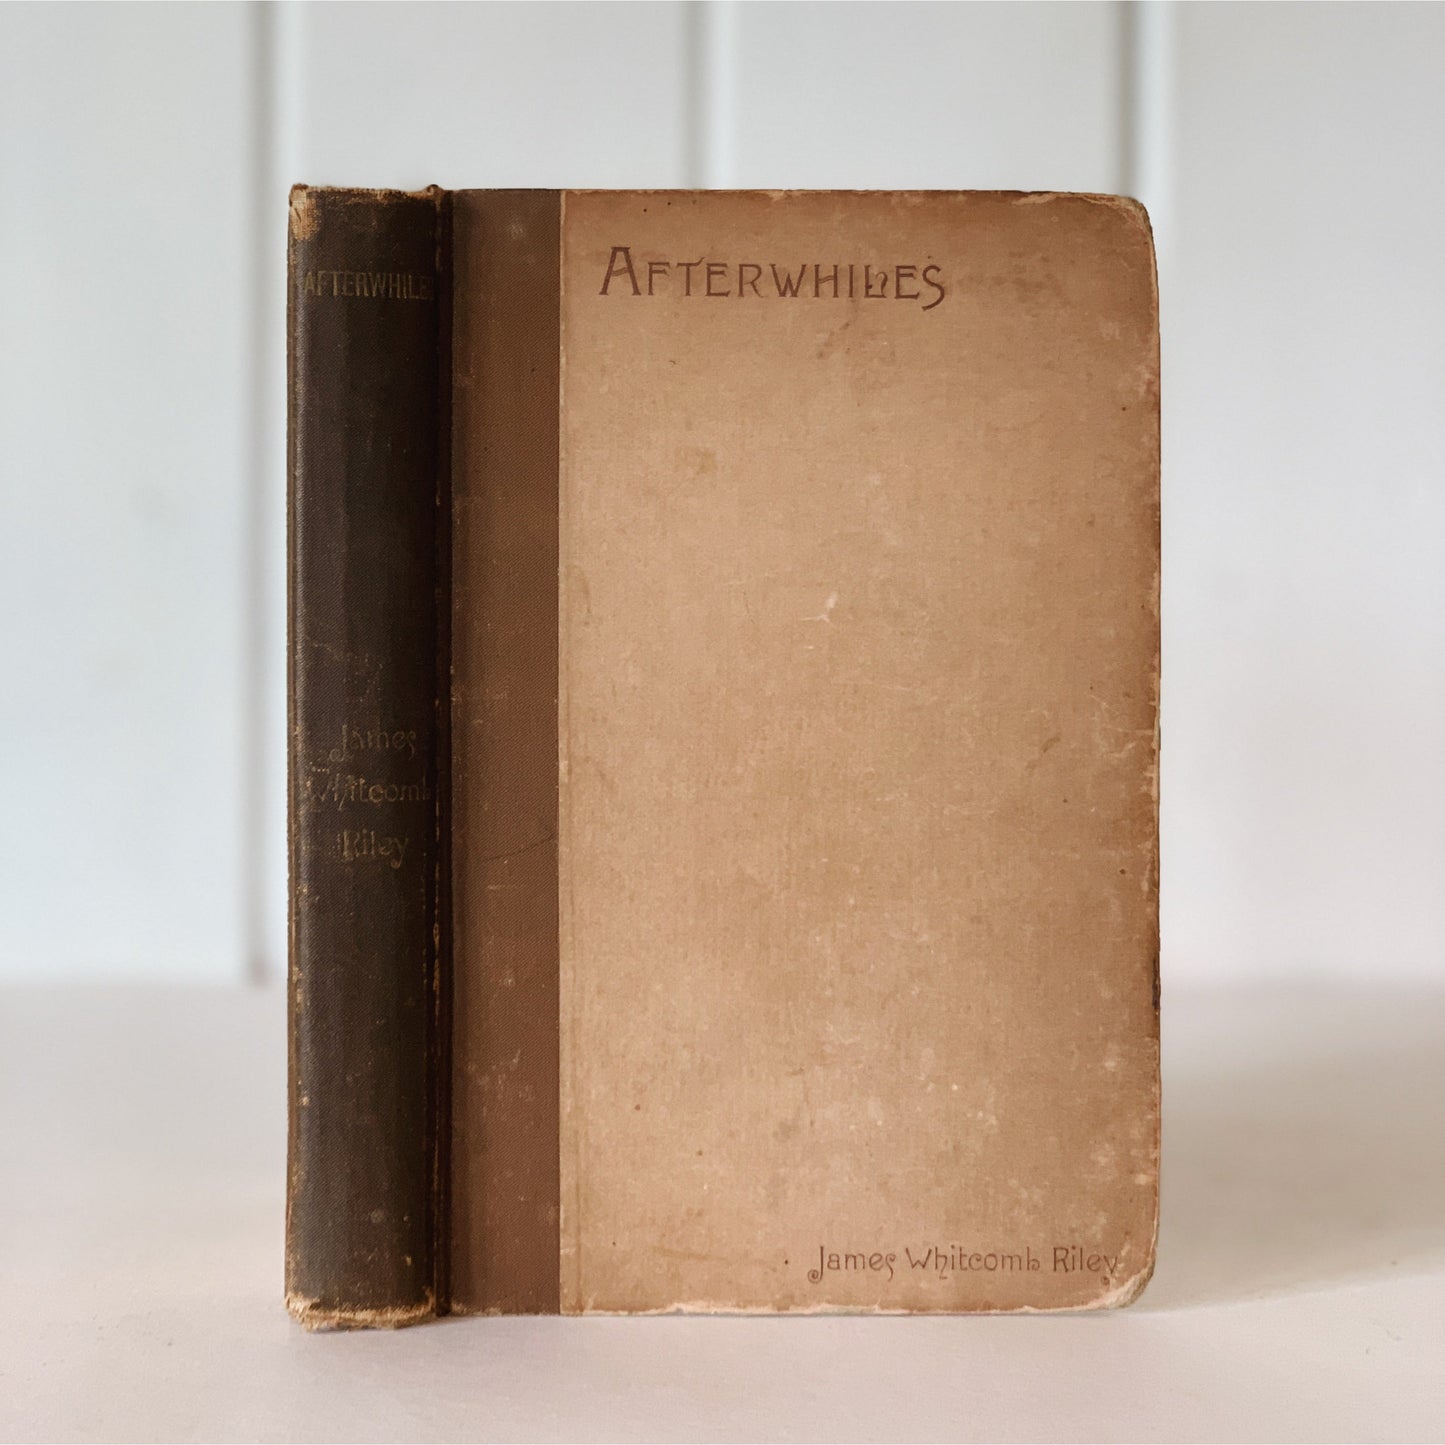 Afterwhiles, James Whitcomb Riley Antique Poetry Book, 1888 Hardcover